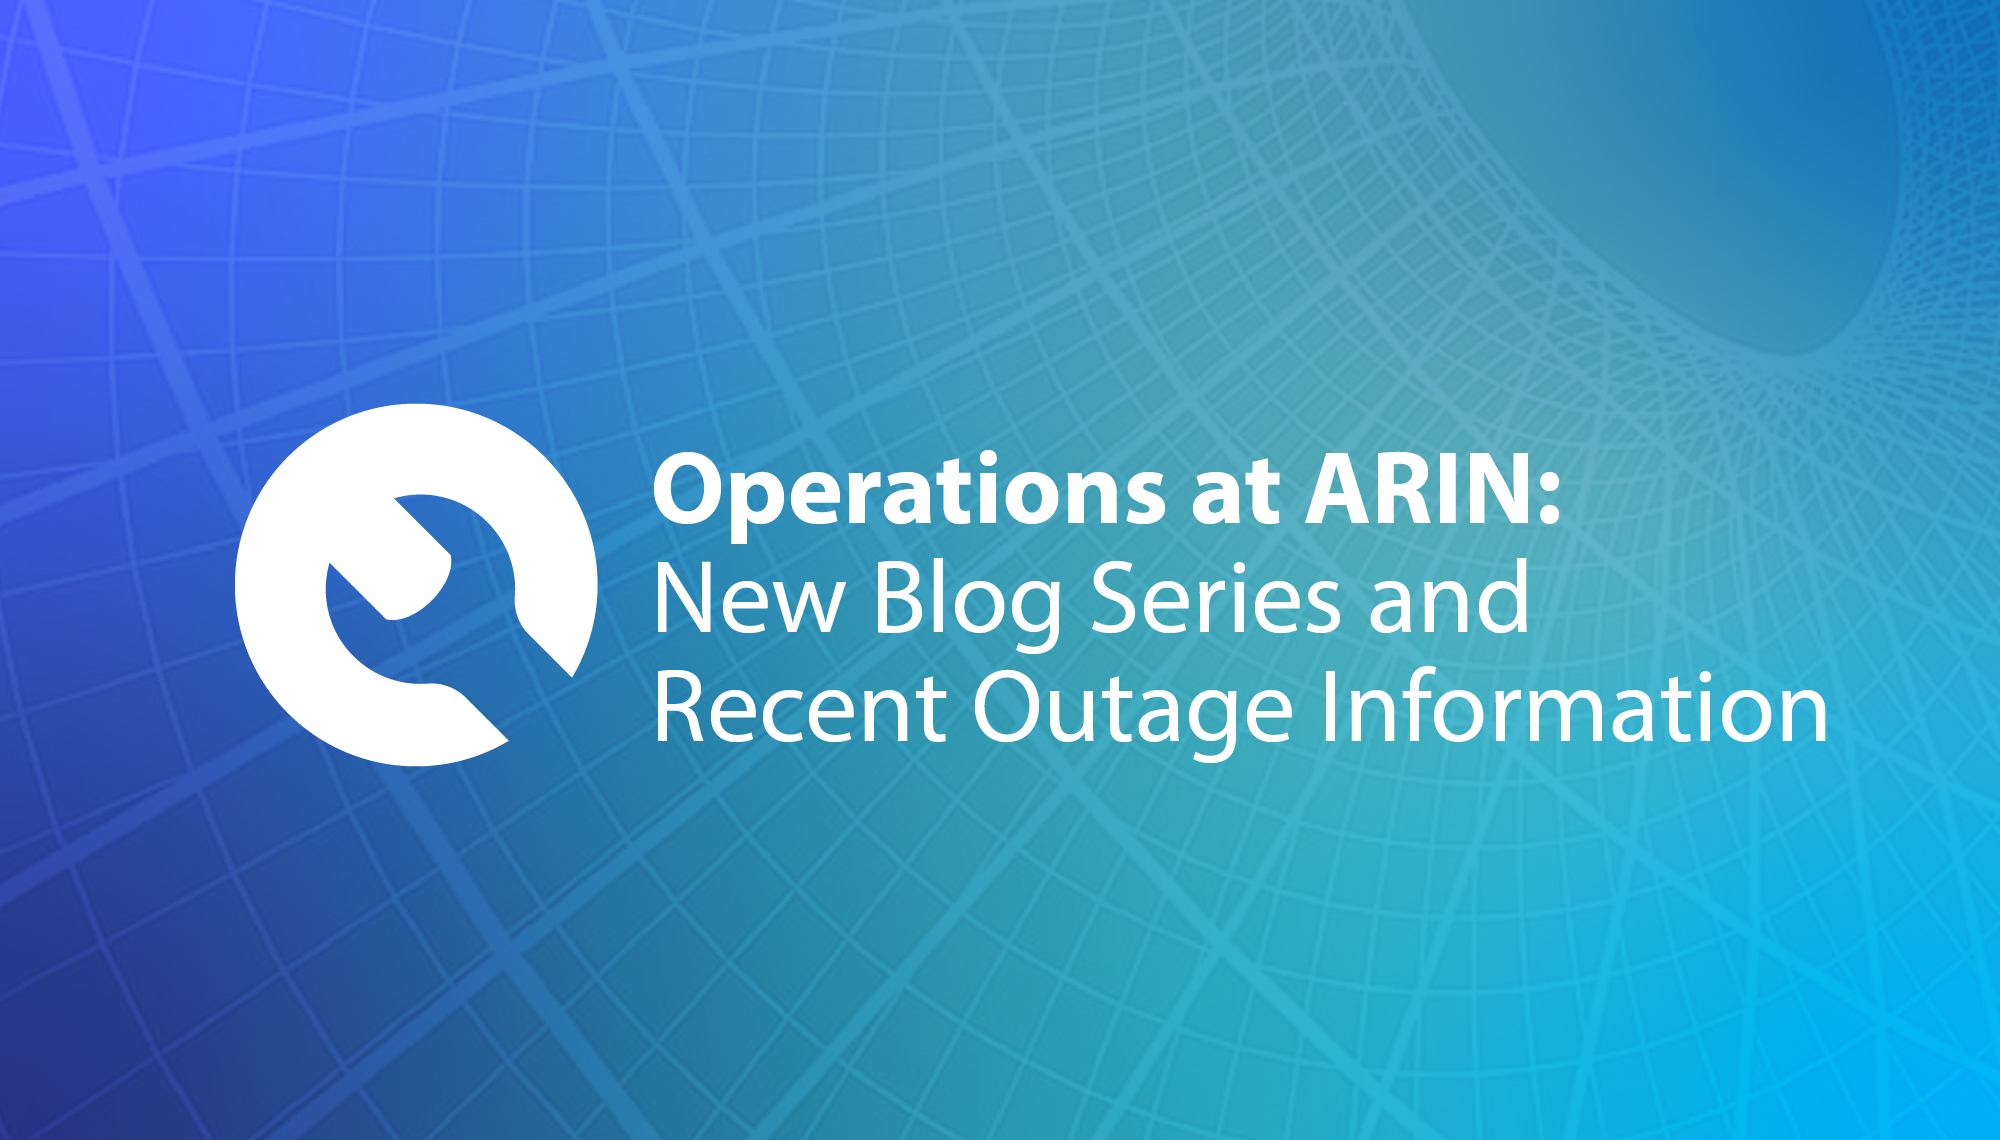 Operations at ARIN: New Blog Series and Recent Outage Information